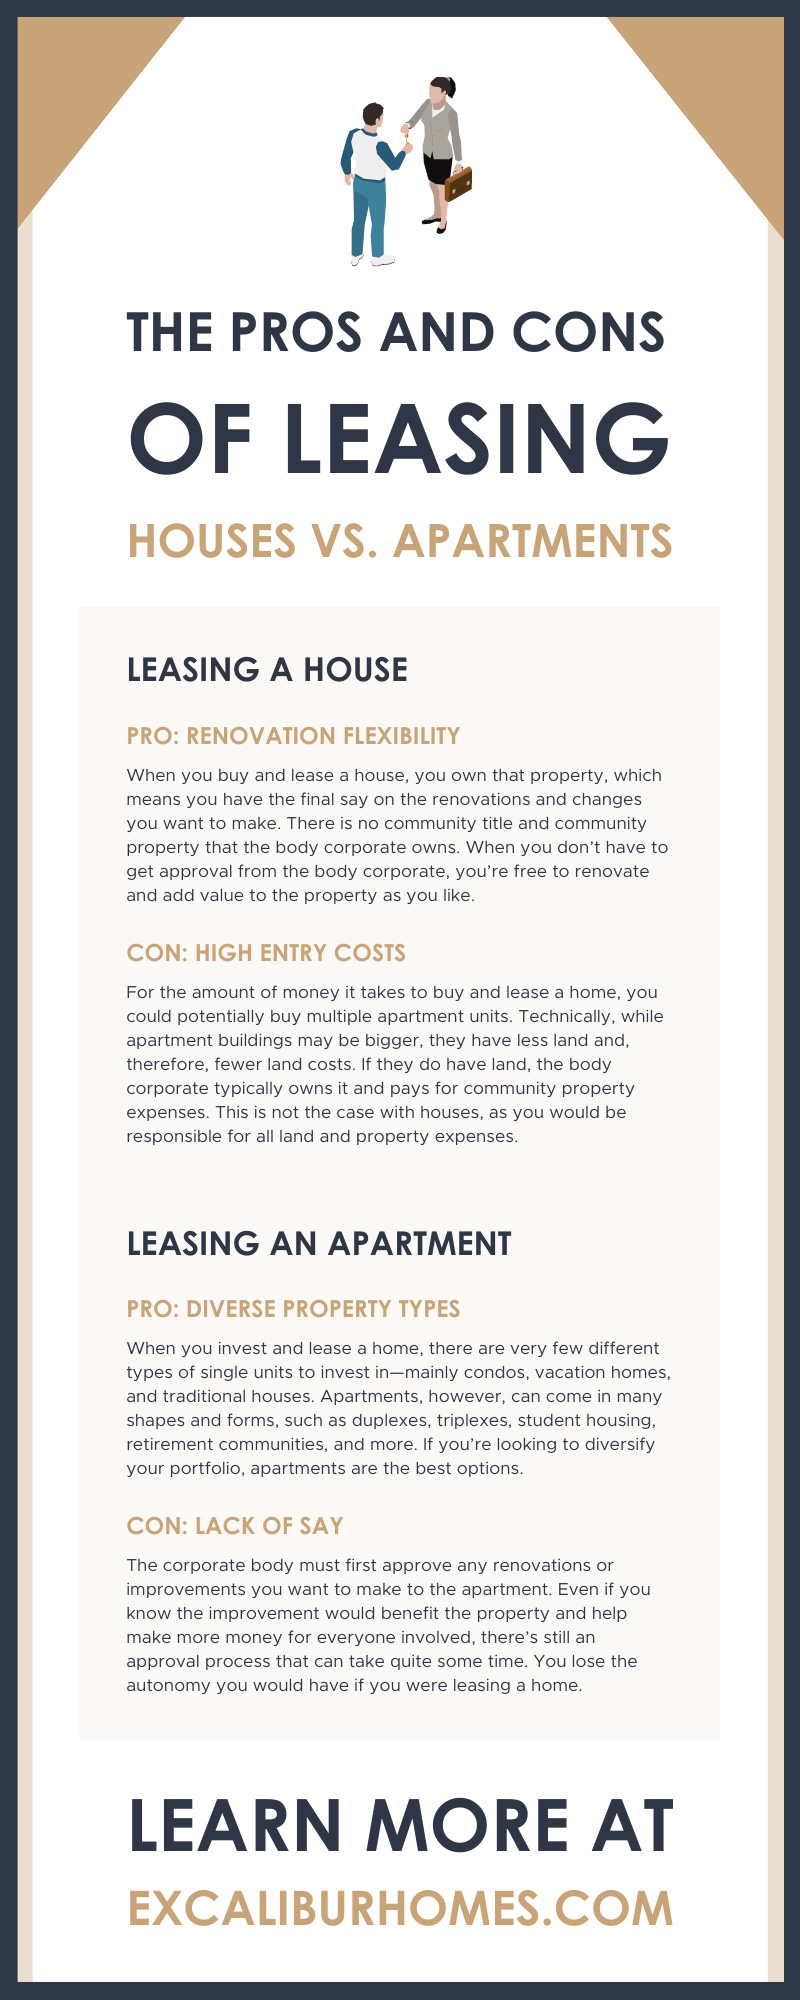 The Pros and Cons of Leasing Houses vs. Apartments 